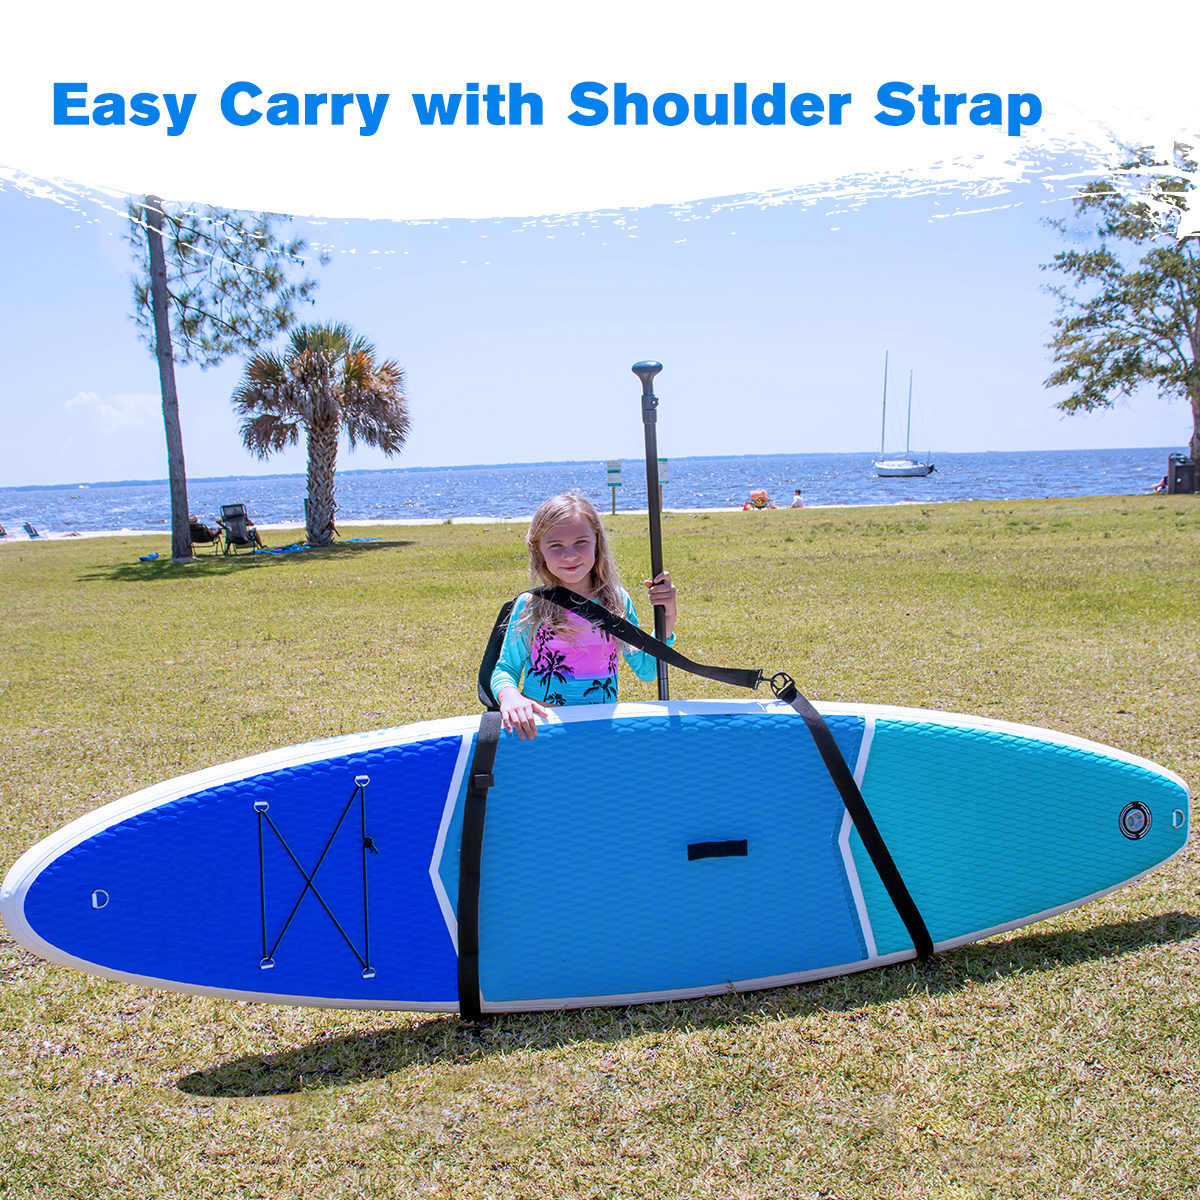 Blue Inflatable SUP Paddle Board -  Easy Carry with Shoulder Strap